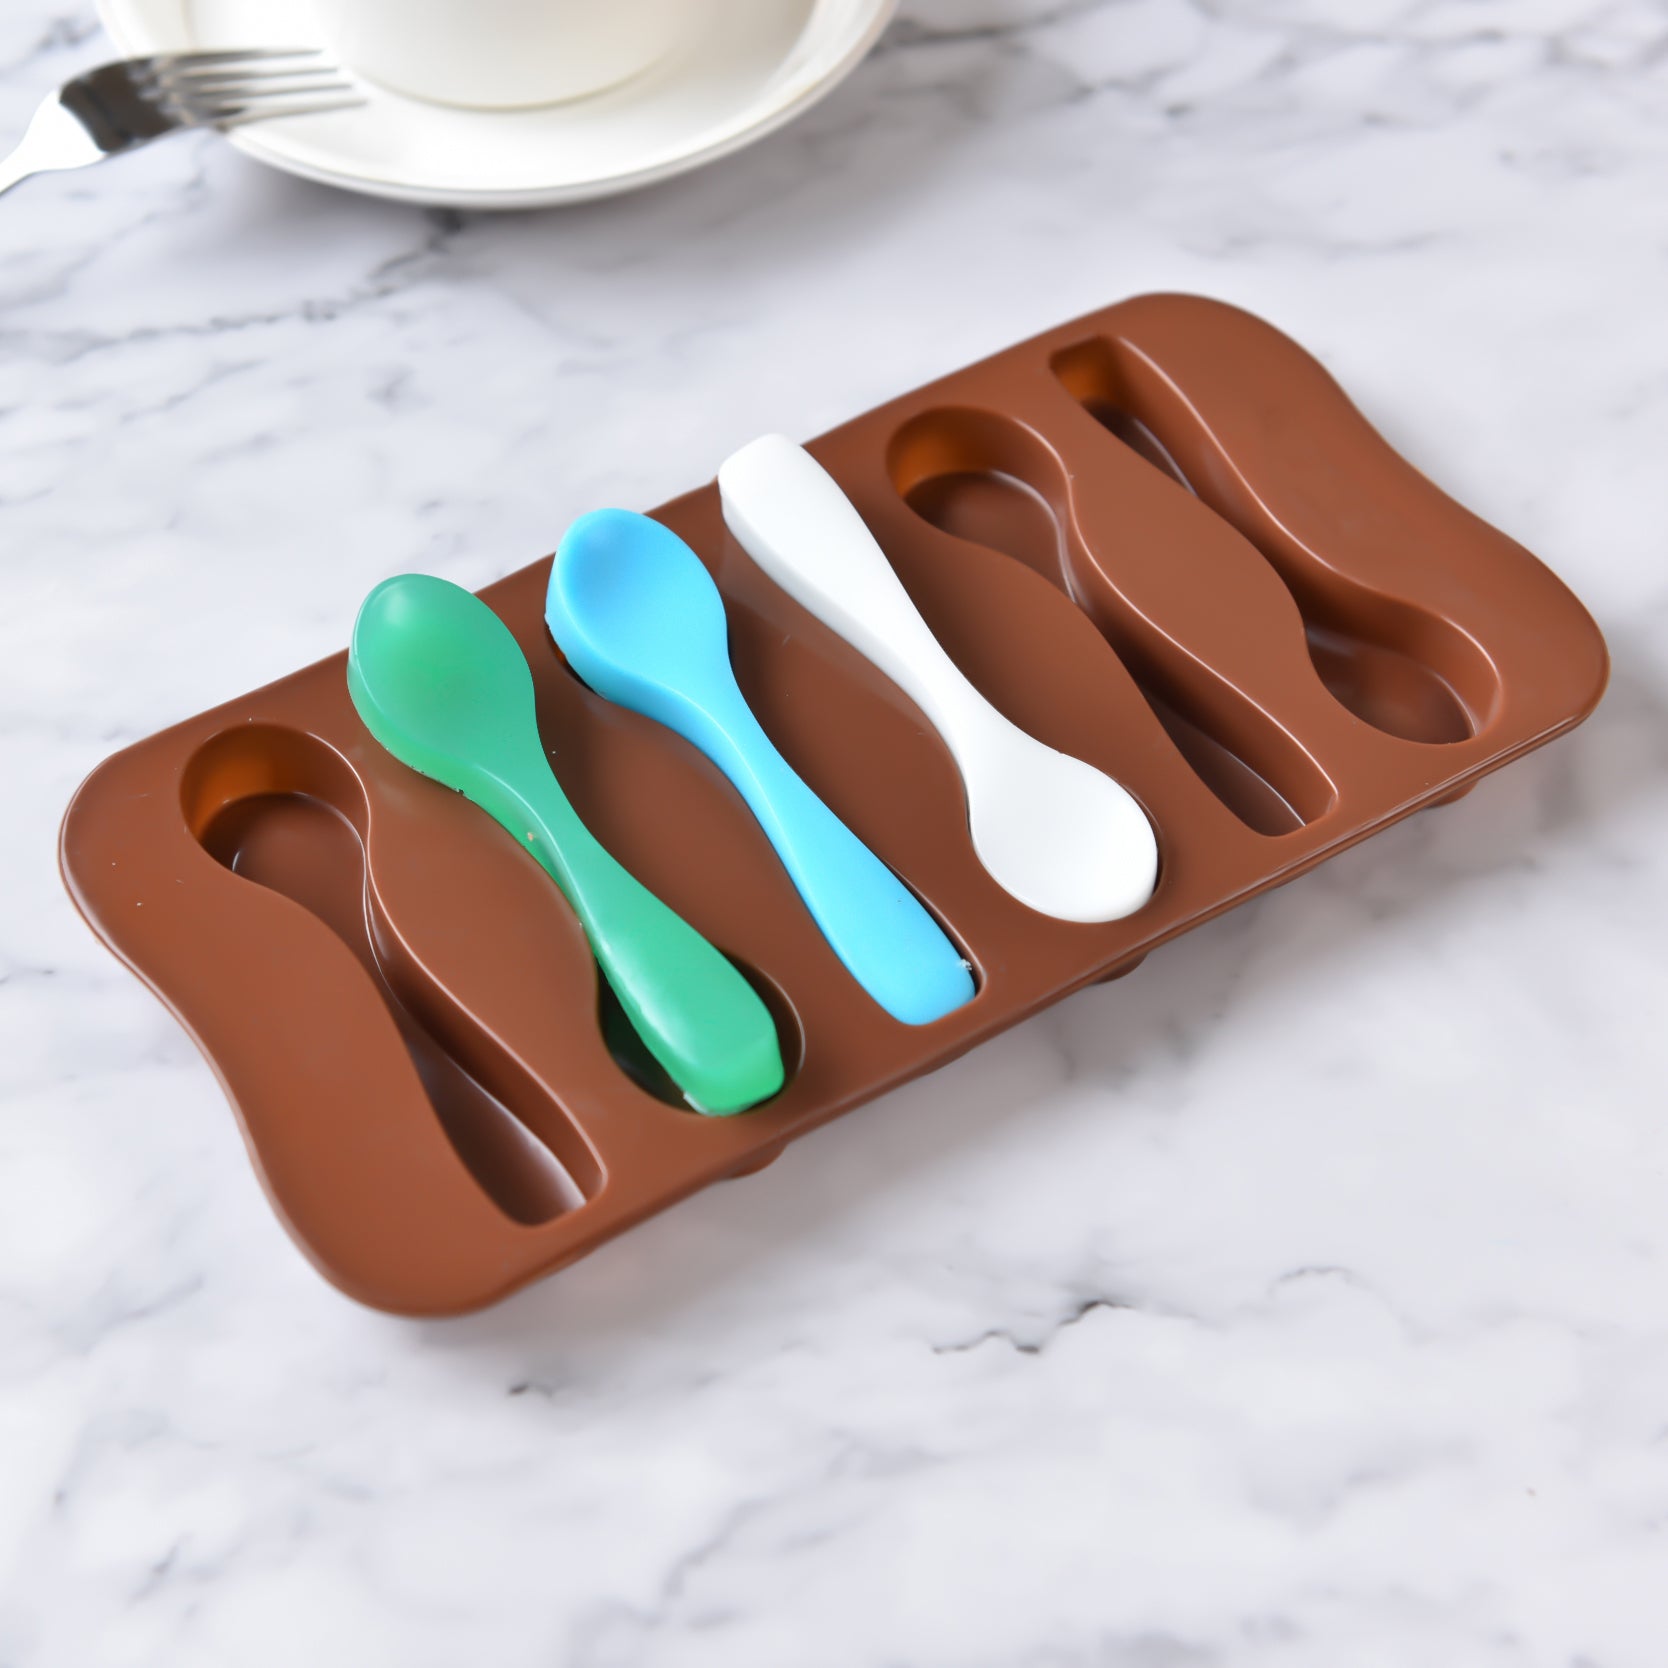 Spoon Silicone Mould